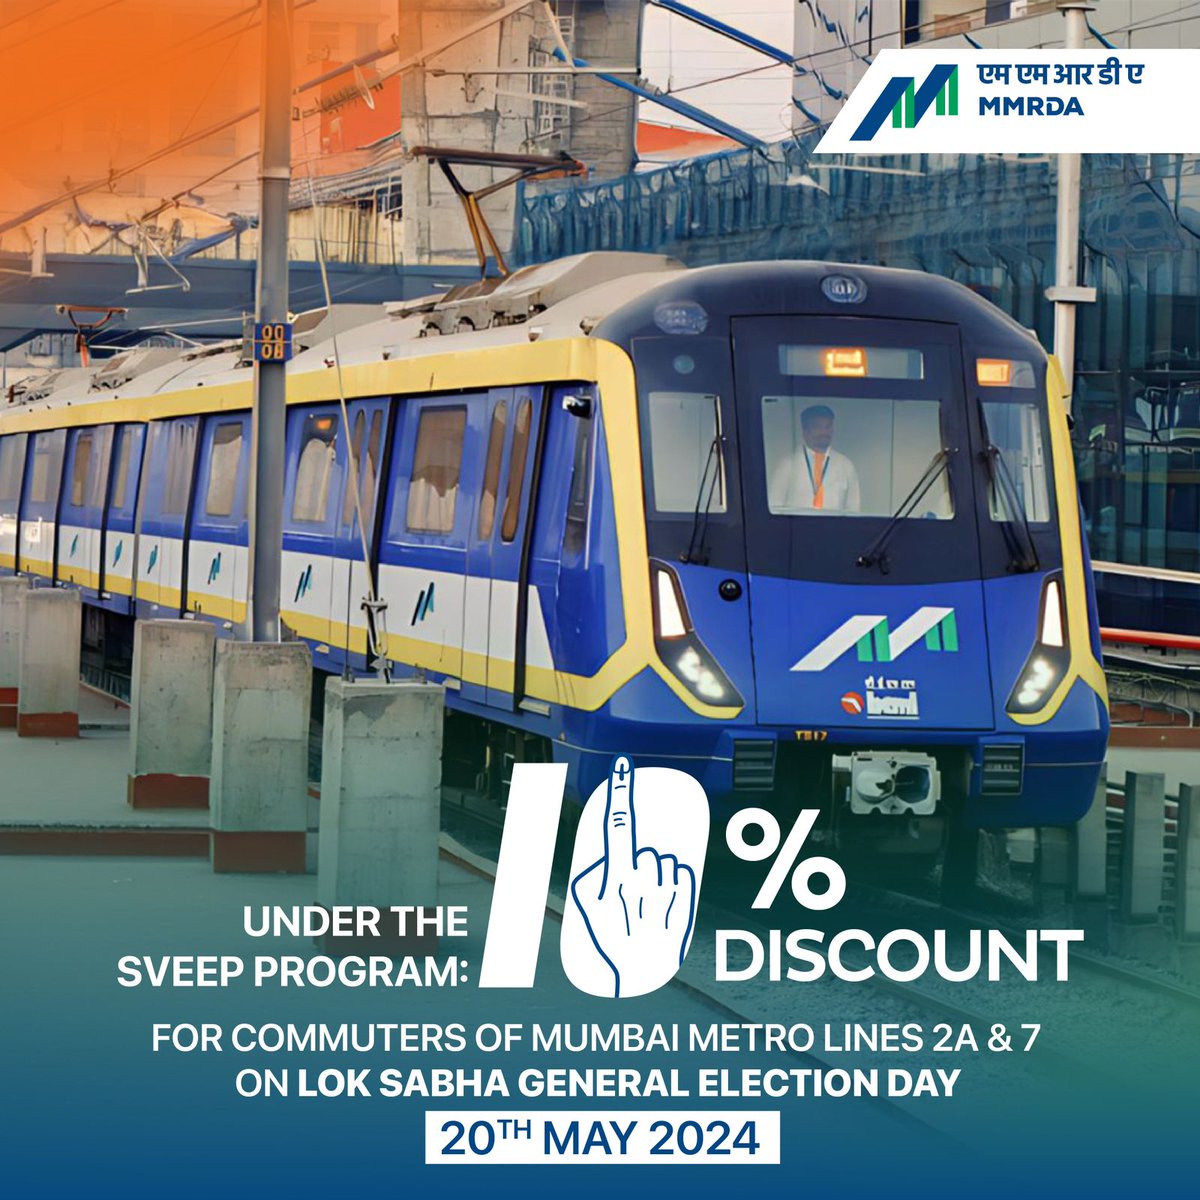 MMMOCL accomplishes the duty of upholding democracy and adding convenience to voters with @ECISVEEP program (Systematic Voter Education and Electoral Participation) of The Election Commission Of India. Passengers of Metro Lines 2A and 7 are about to get a special 10% discount on